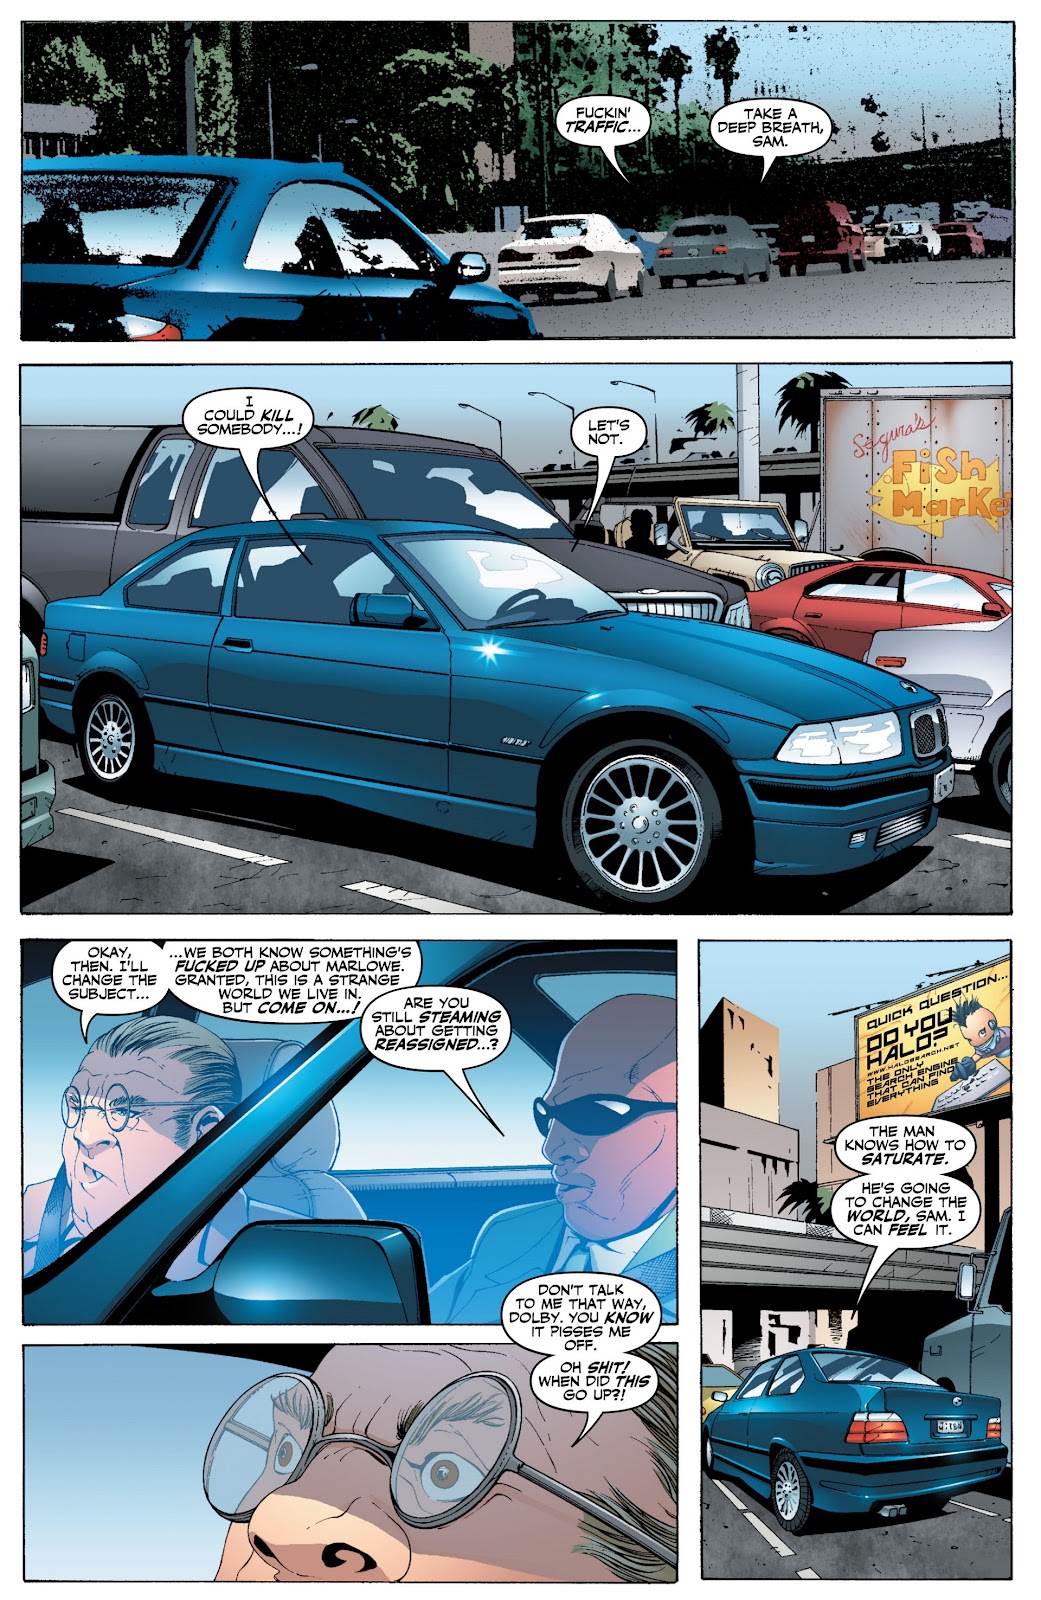 Wildcats Version 3.0 Issue #6 #6 - English 5